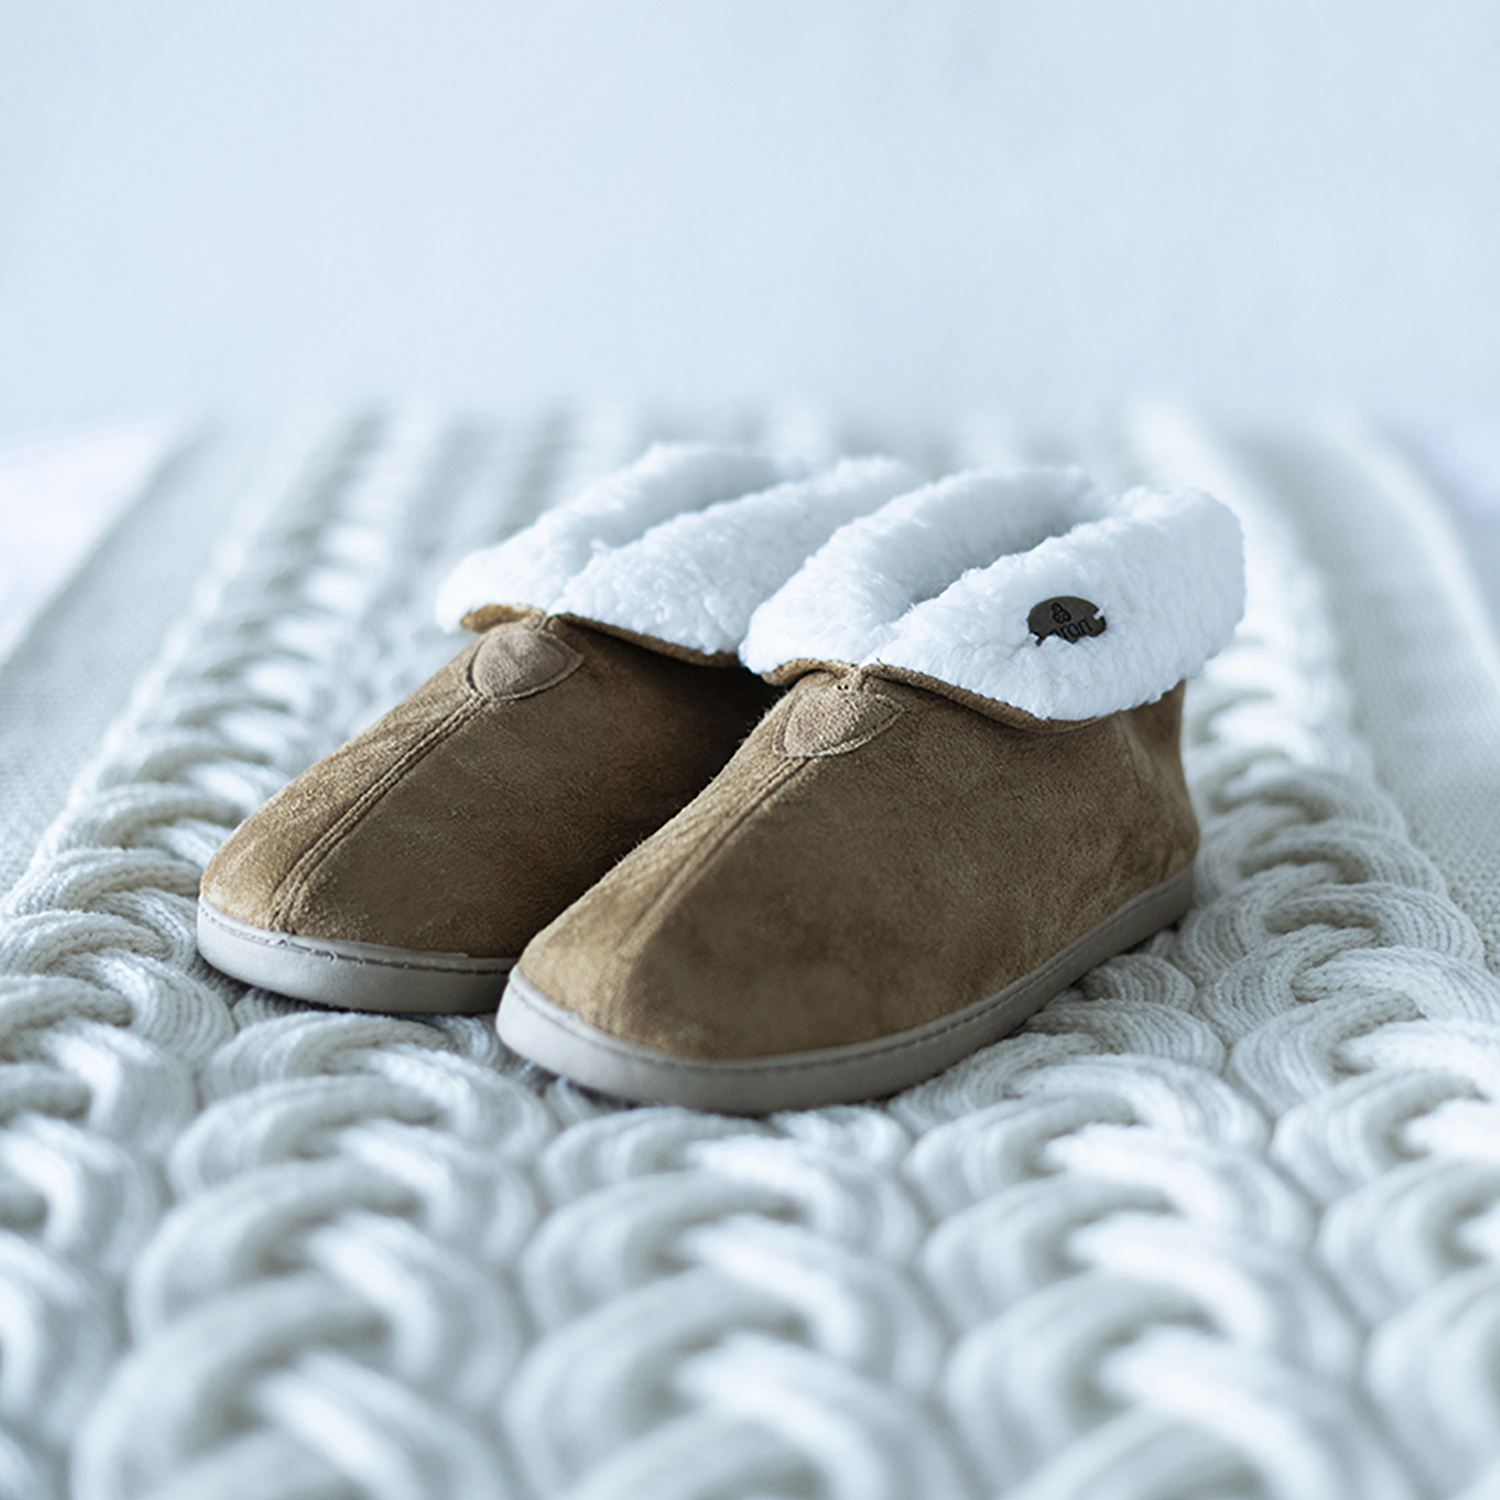 ARAN Suede Bootie Slippers with Fur Lining (Size:Small 4-5) - Brown